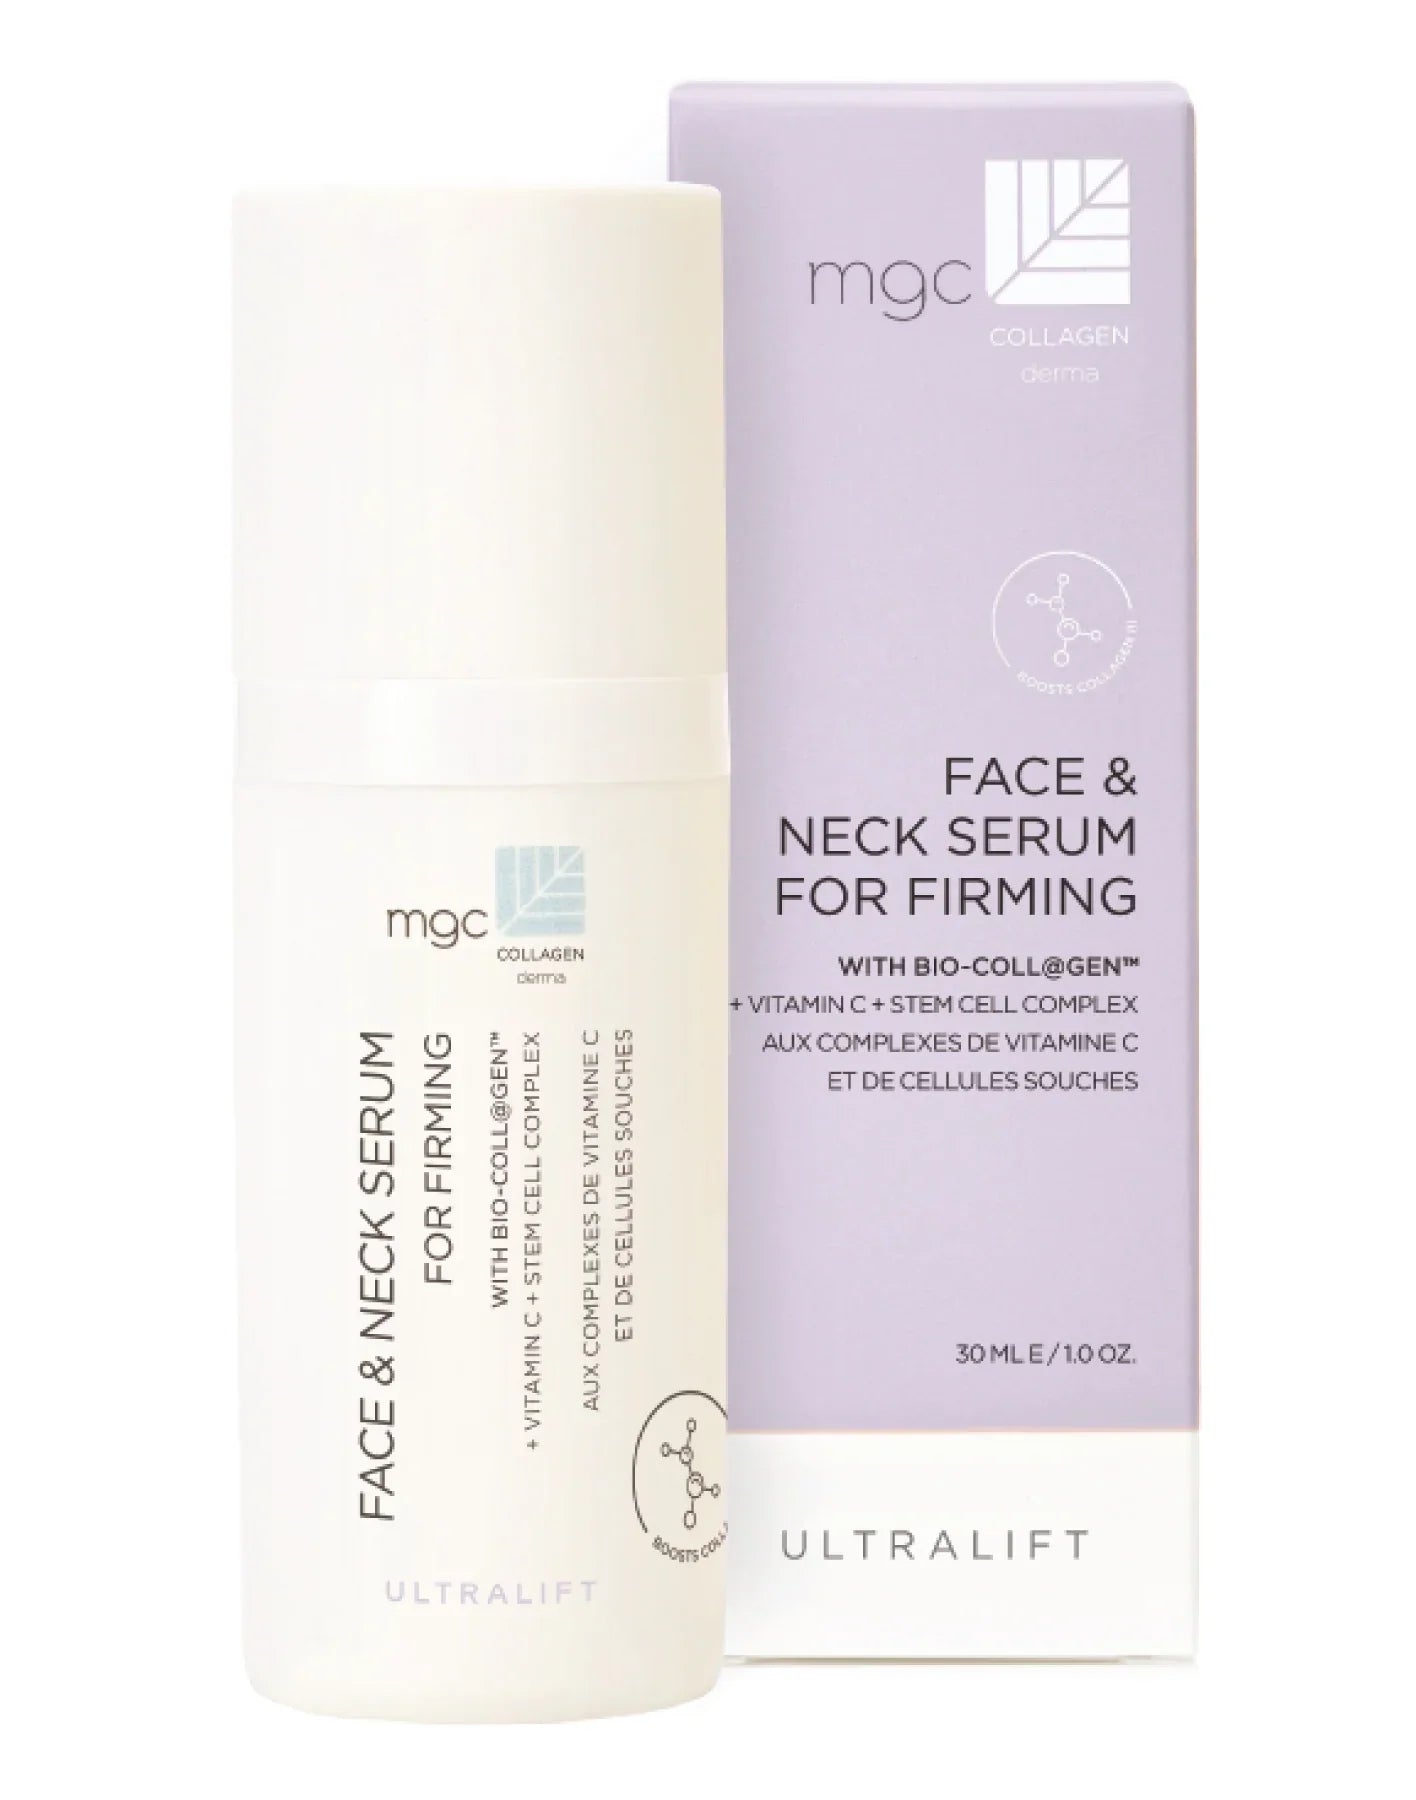 Ultra lift face and neck serum for firming